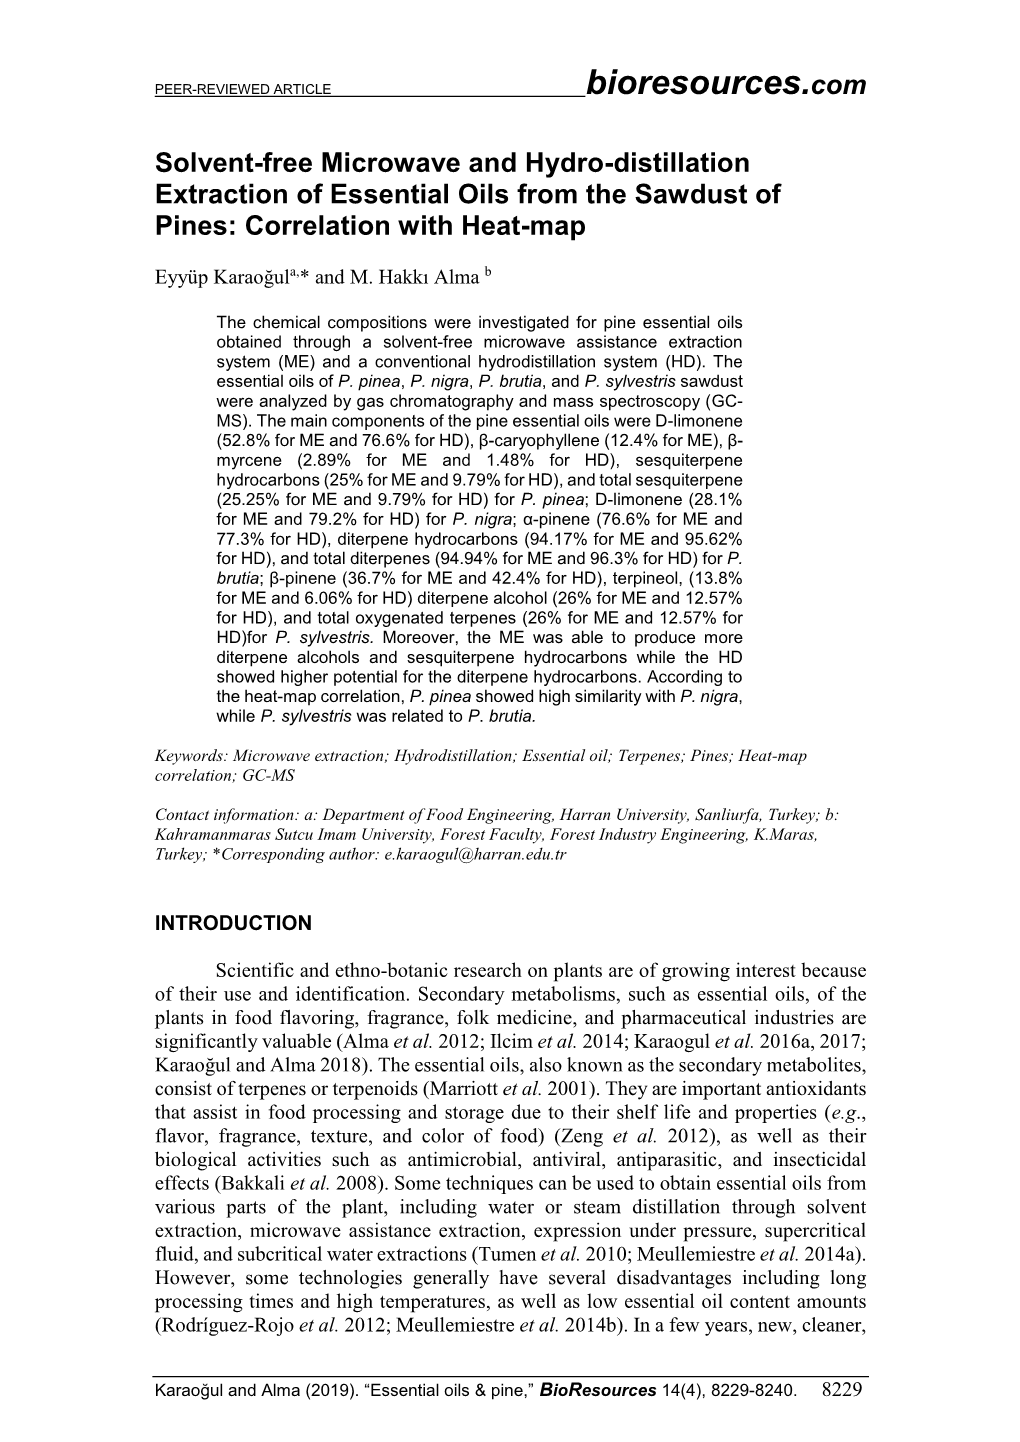 Solvent-Free Microwave and Hydro-Distillation Extraction of Essential Oils from the Sawdust of Pines: Correlation with Heat-Map